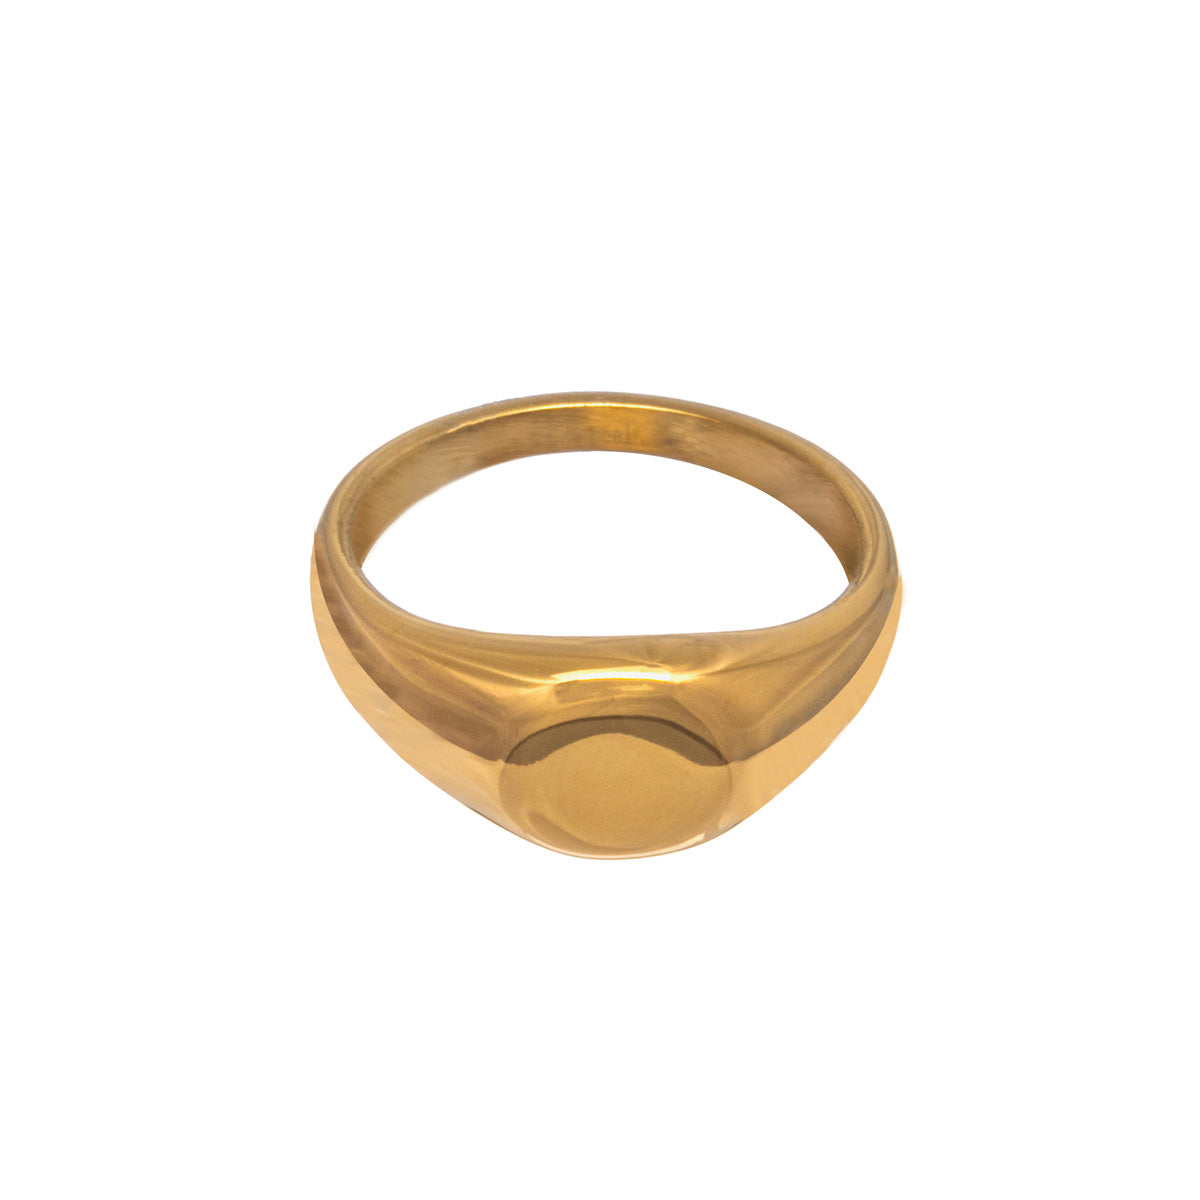 Narrow gold wedding band gold plated steel ring